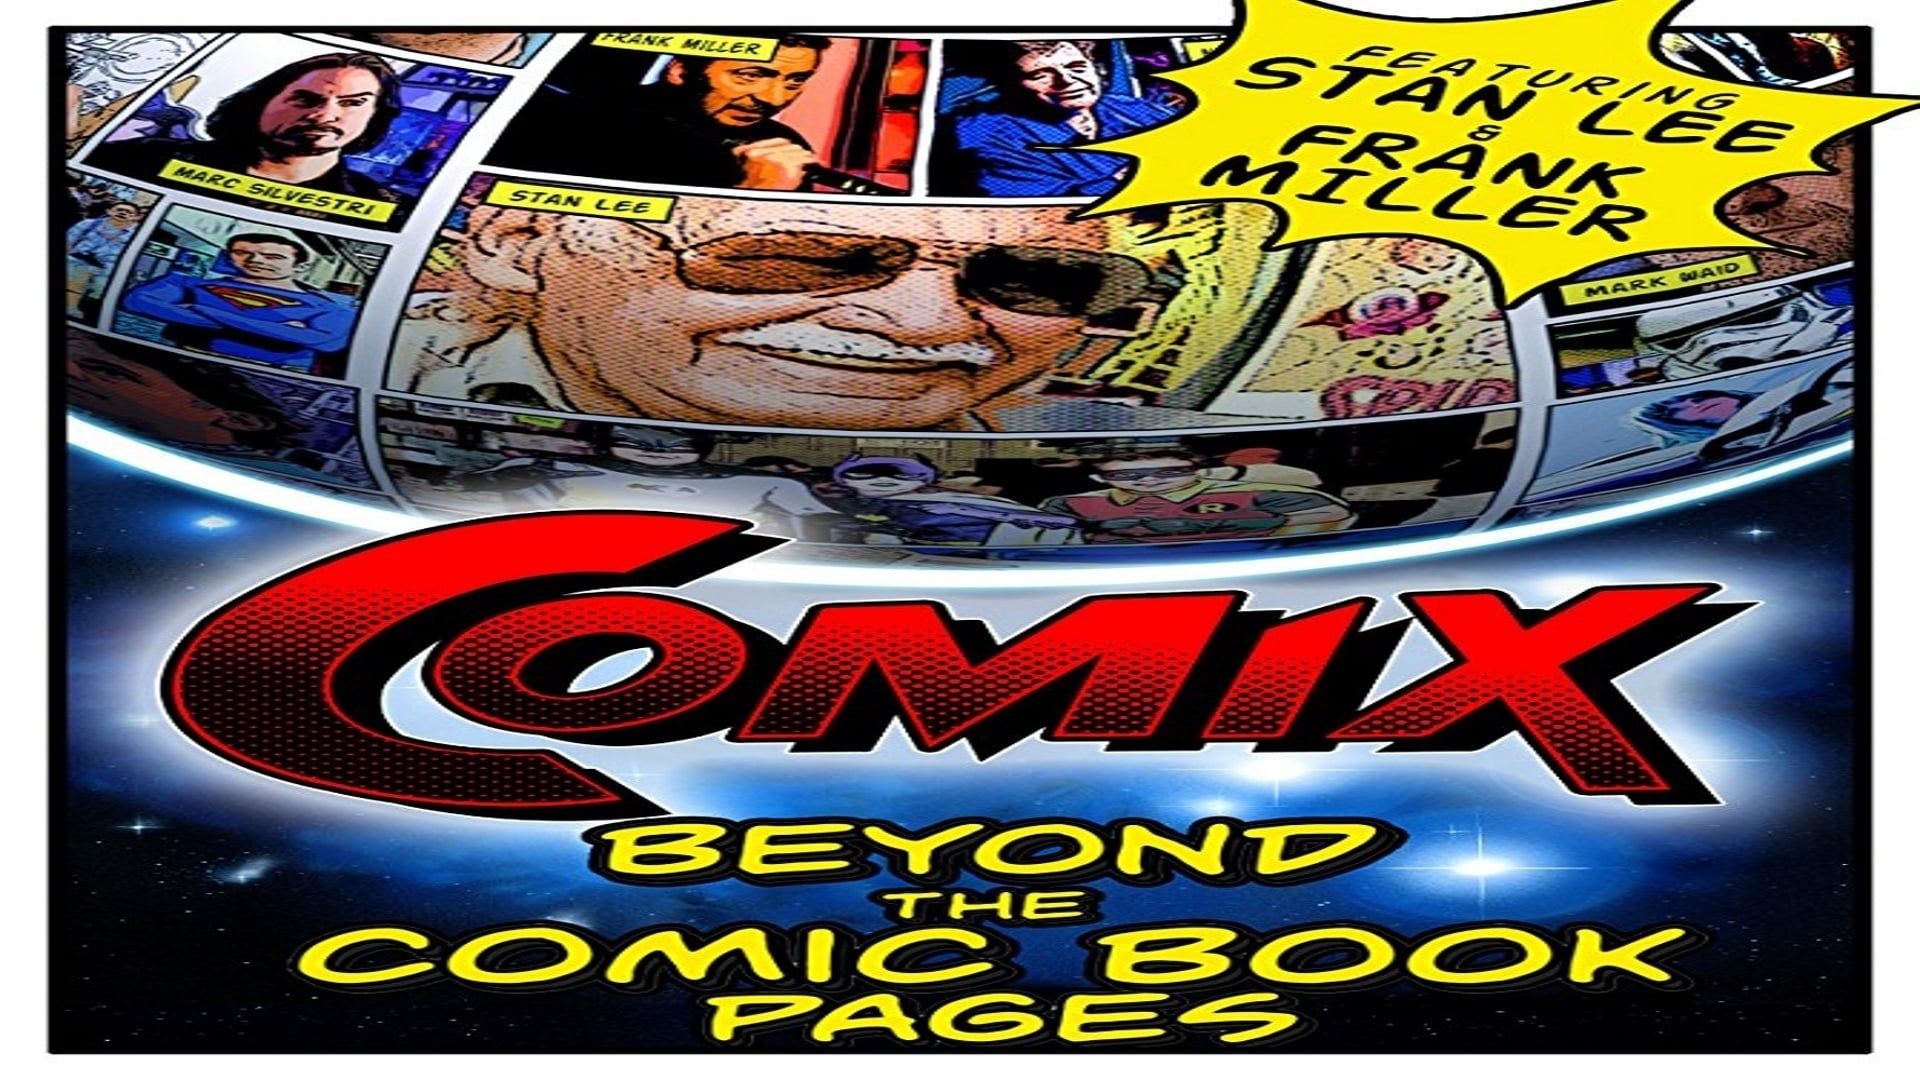 COMIX: Beyond the Comic Book Pages background